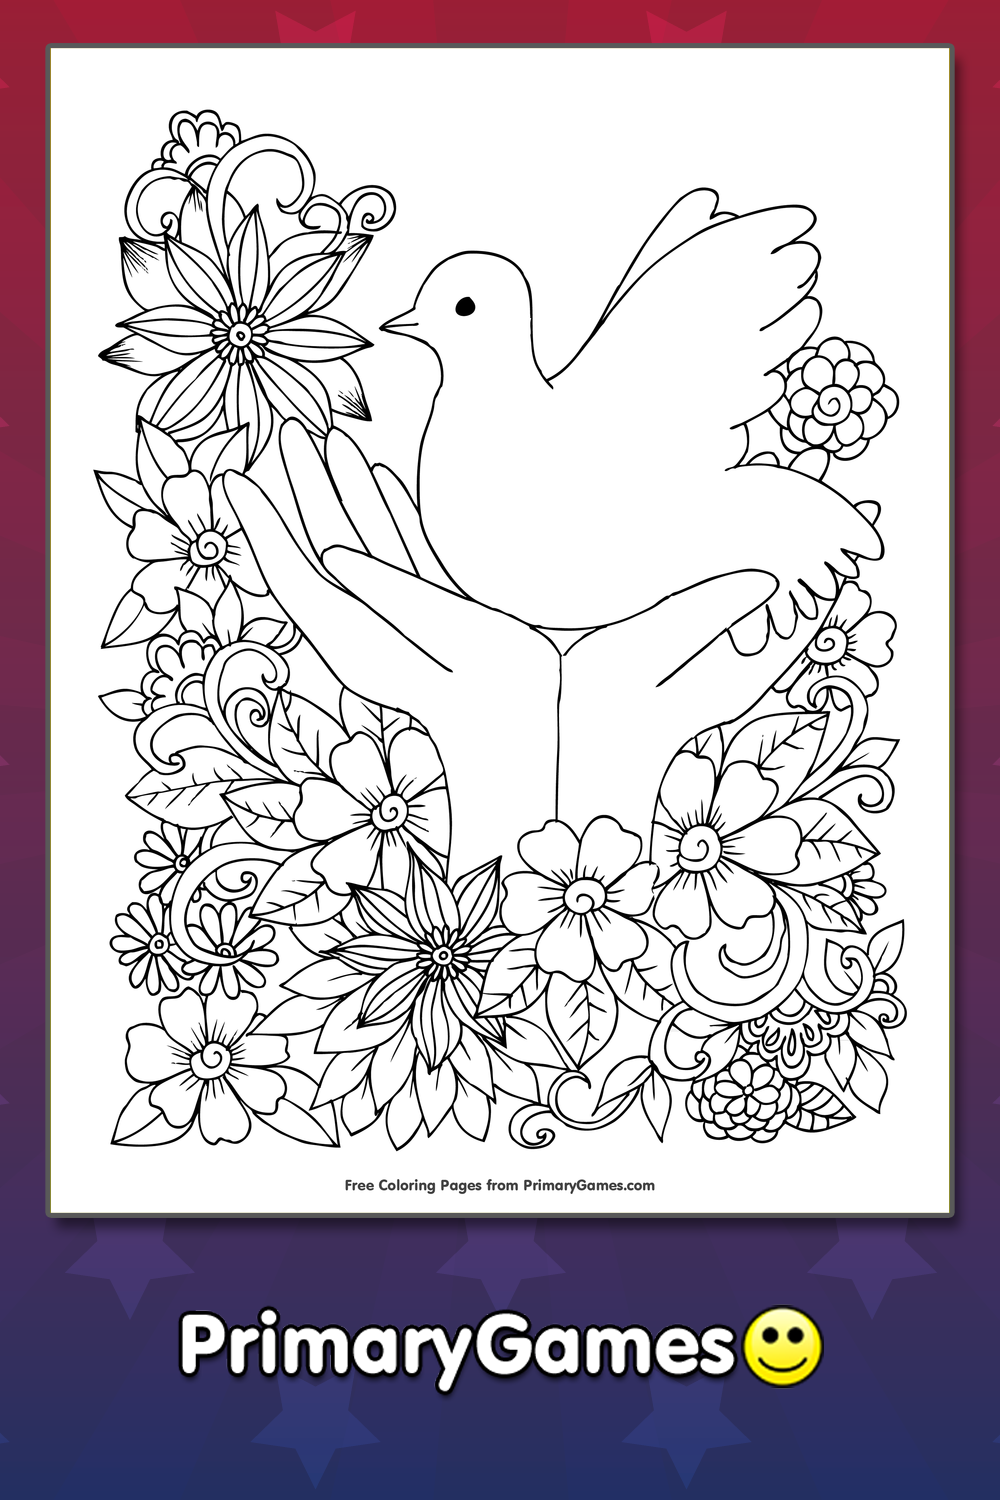 Hands holding a dove coloring page â free printable pdf from